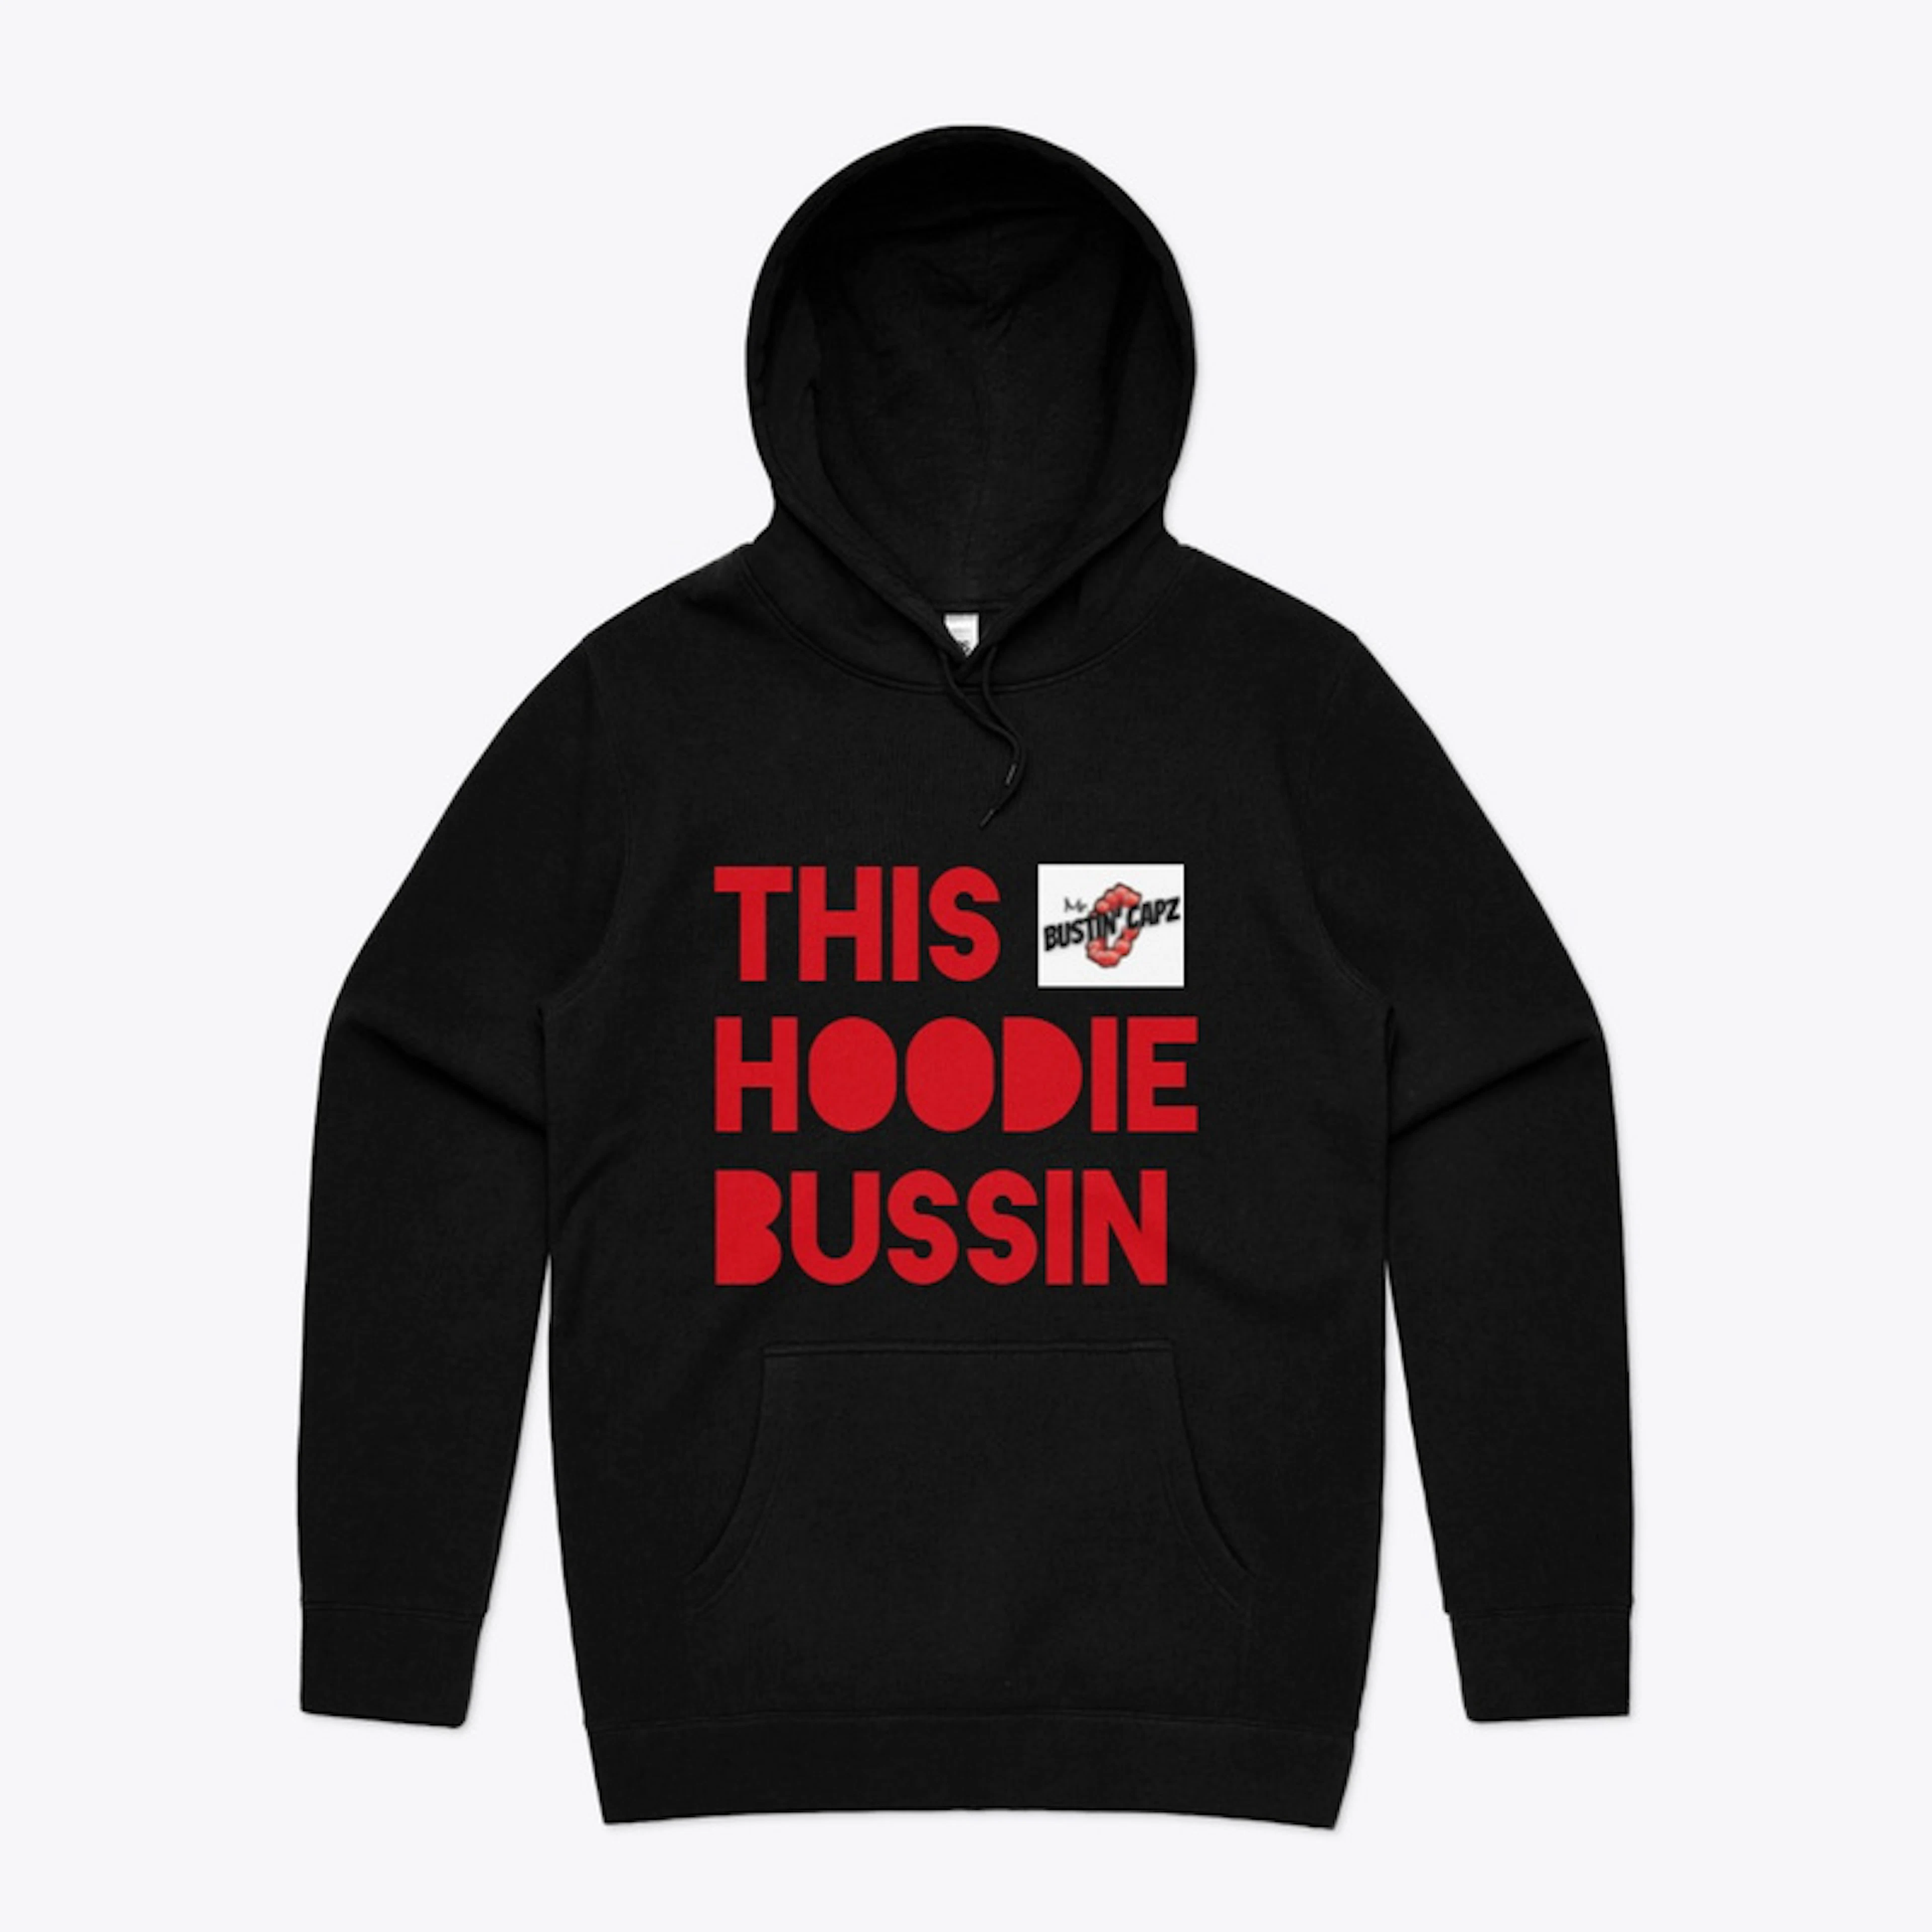 This Hoodie Bussin